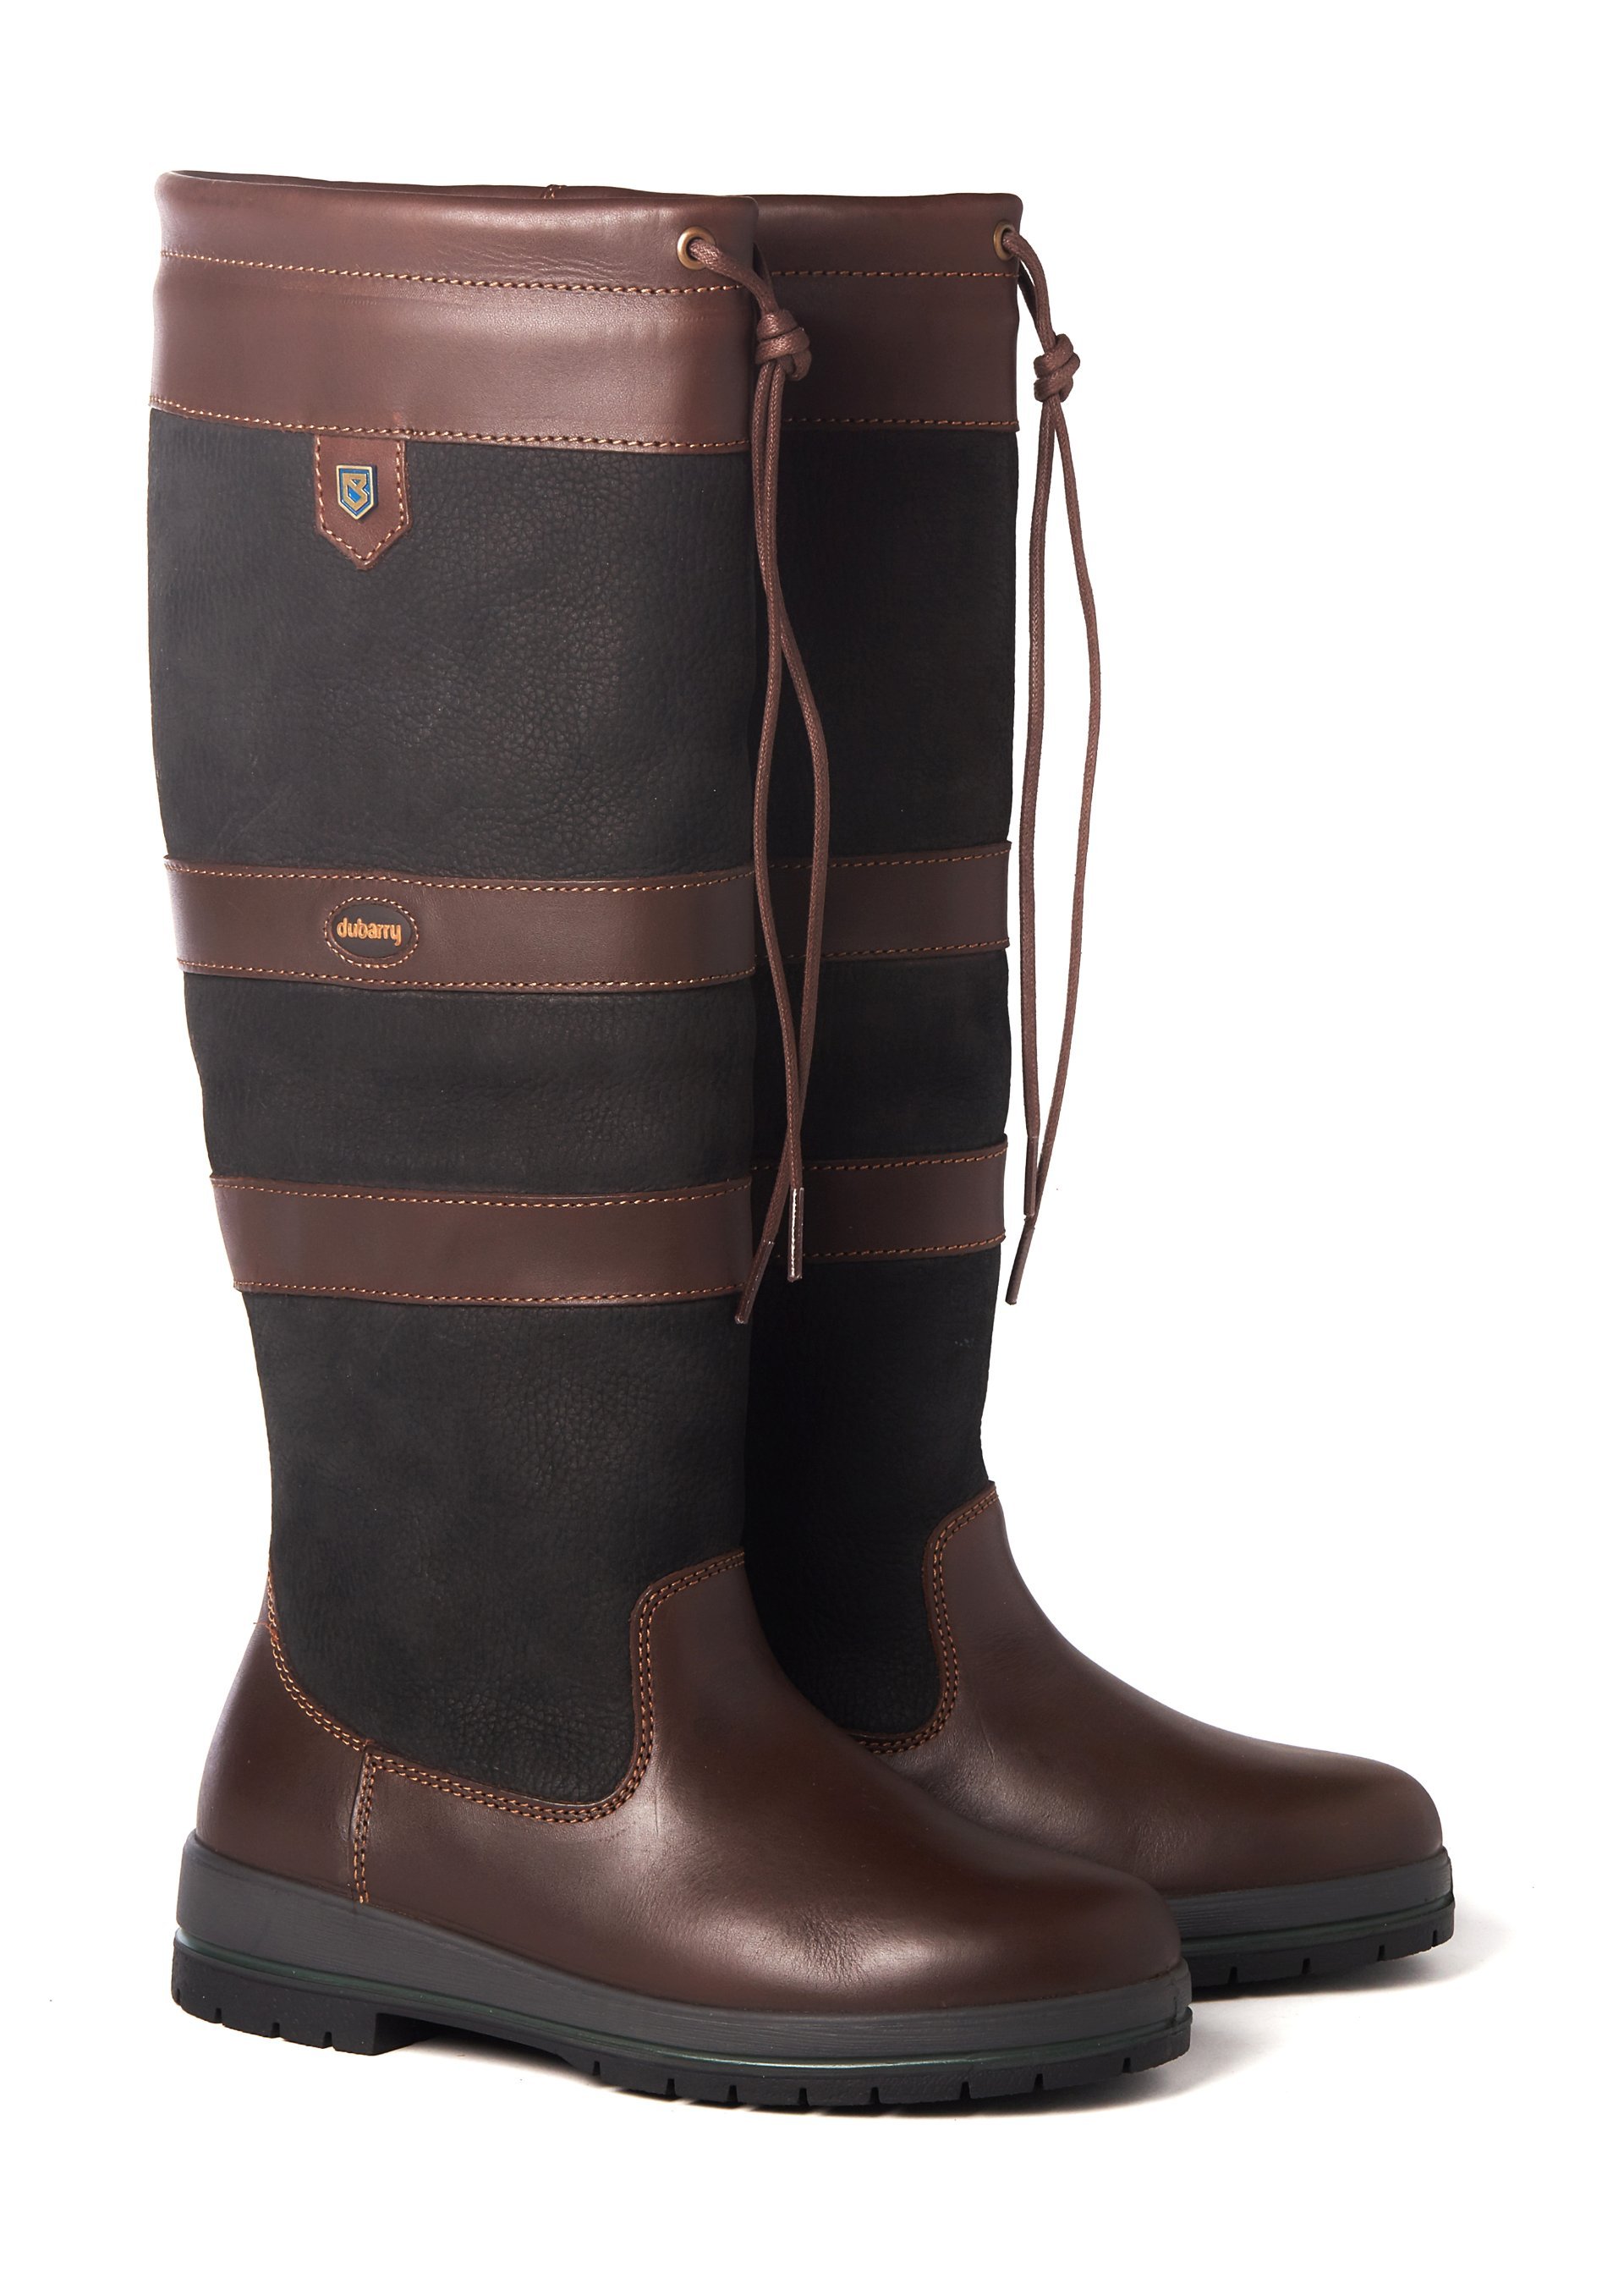 Dubarry - Galway Extrafit - Black Brown